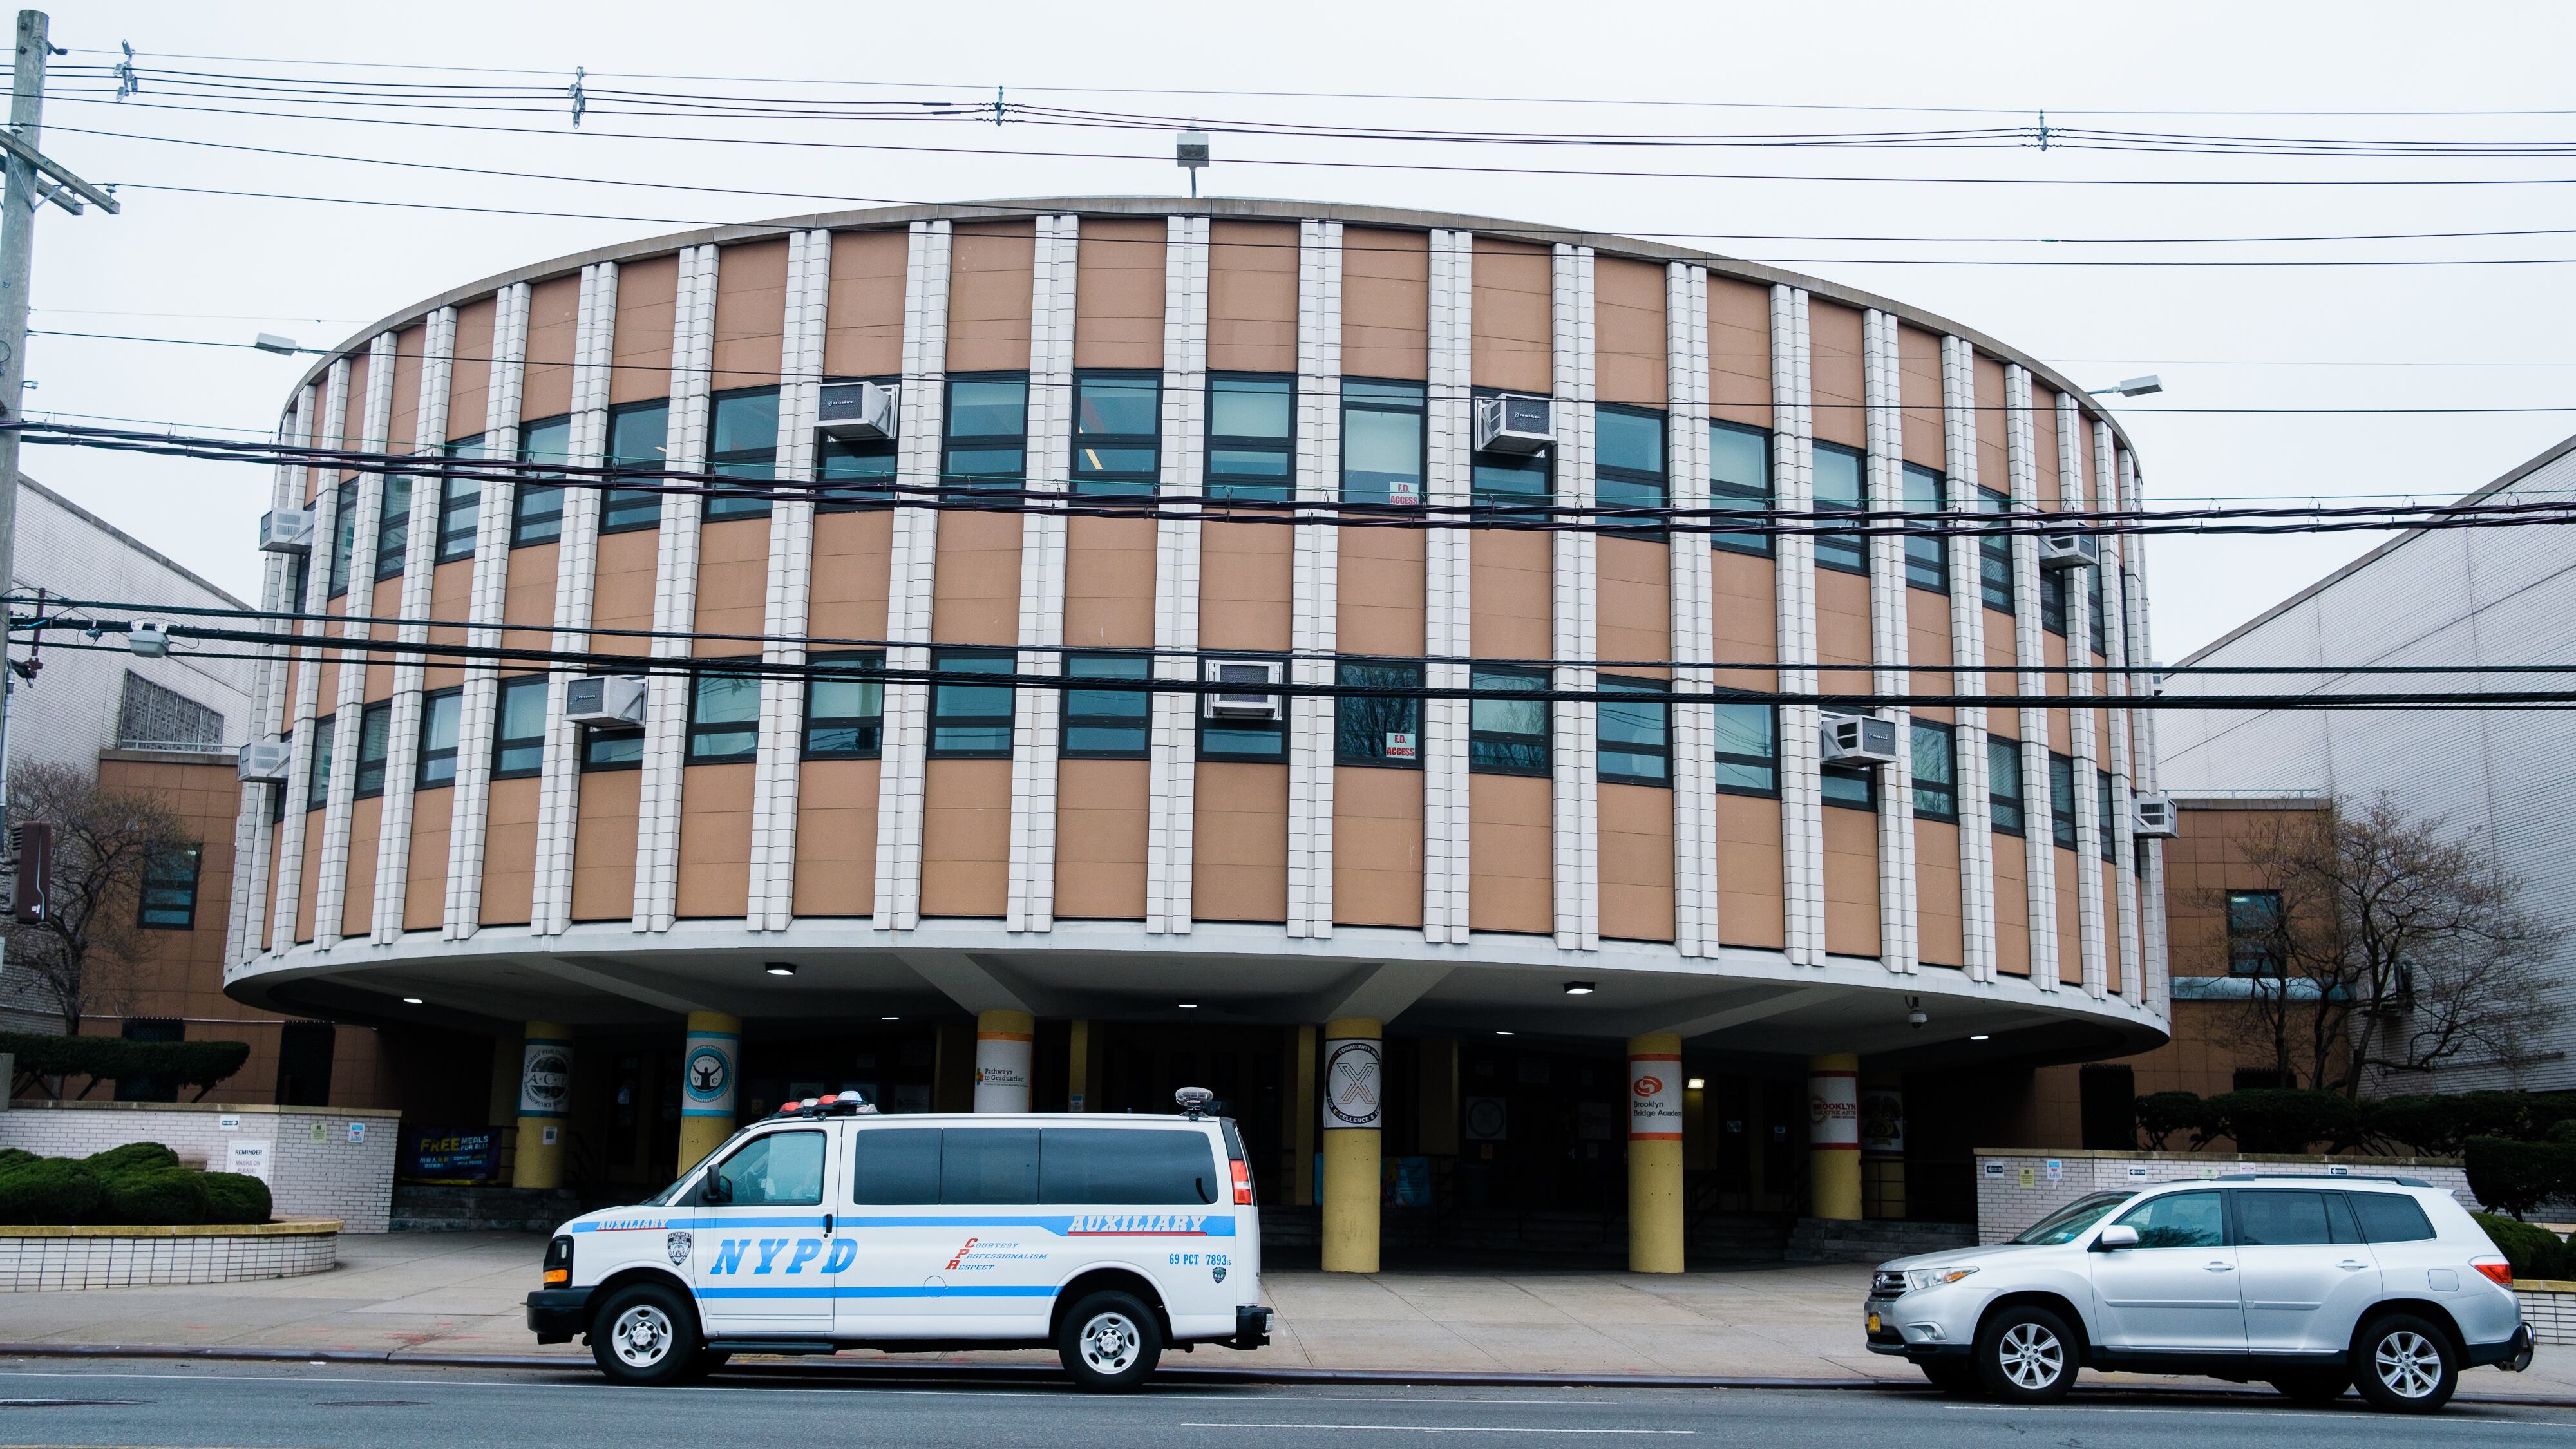 The curved facade of Brooklyn High School for Excellence and Equity in Canarsie. There is an NYPD van parked outside, as well as a standard silver SUV.